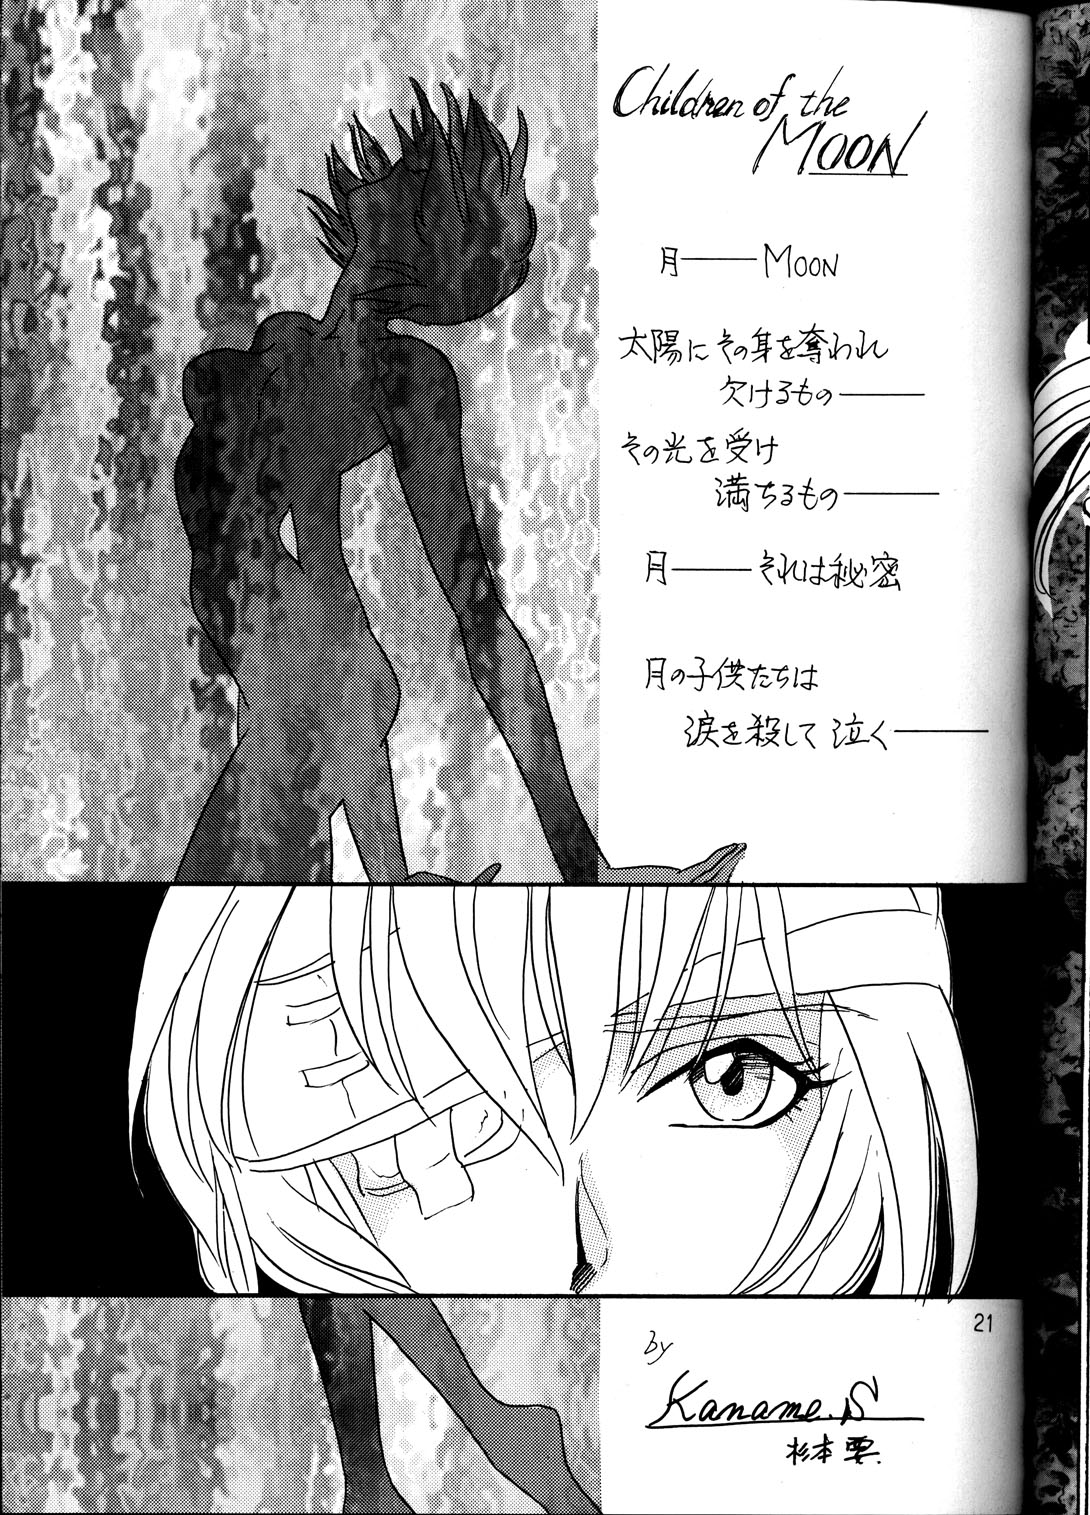 [Nabarl Doumei] Lonely Moon (Evangelion) page 20 full